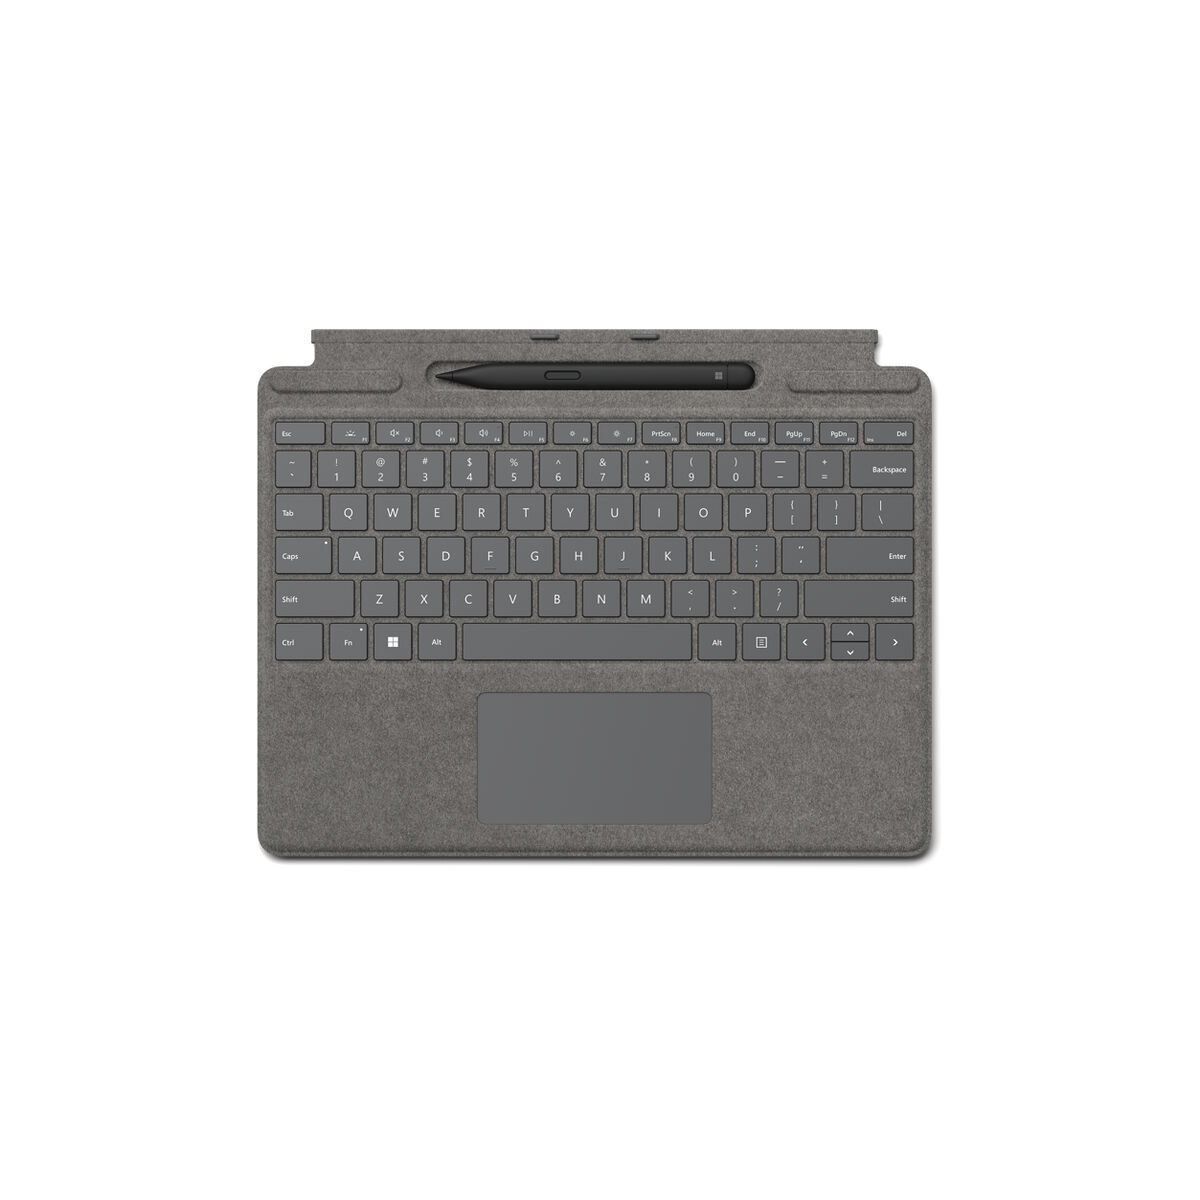 Tastiera Surface Pro 8 Microsoft 8X8-00072 Spagnolo Qwerty in Spagnolo QWERTY